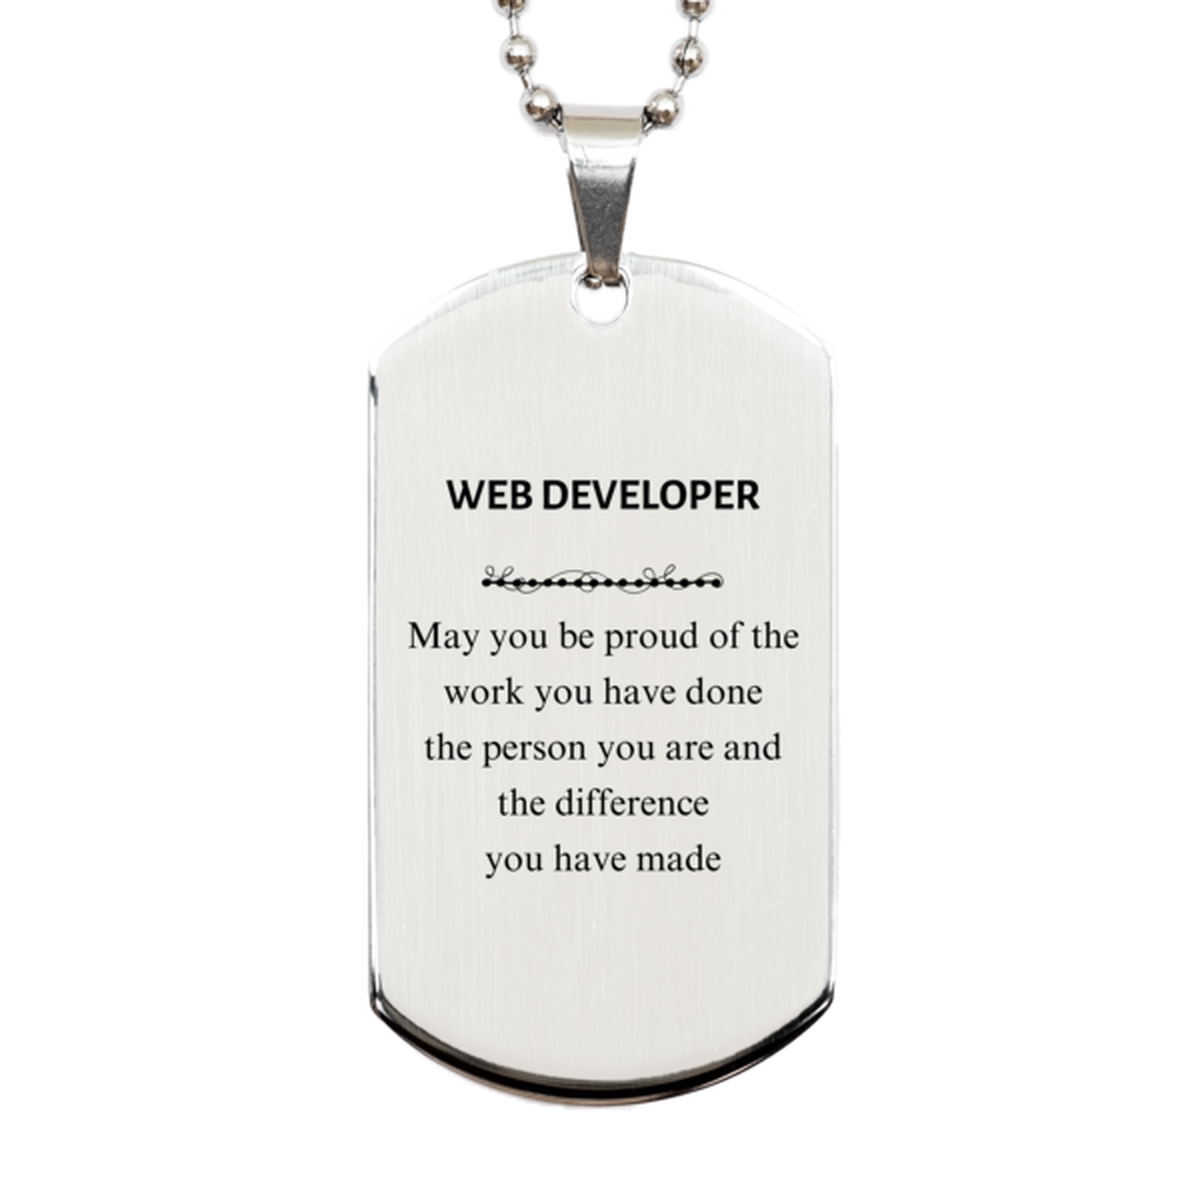 Web Developer May you be proud of the work you have done, Retirement Web Developer Silver Dog Tag for Colleague Appreciation Gifts Amazing for Web Developer